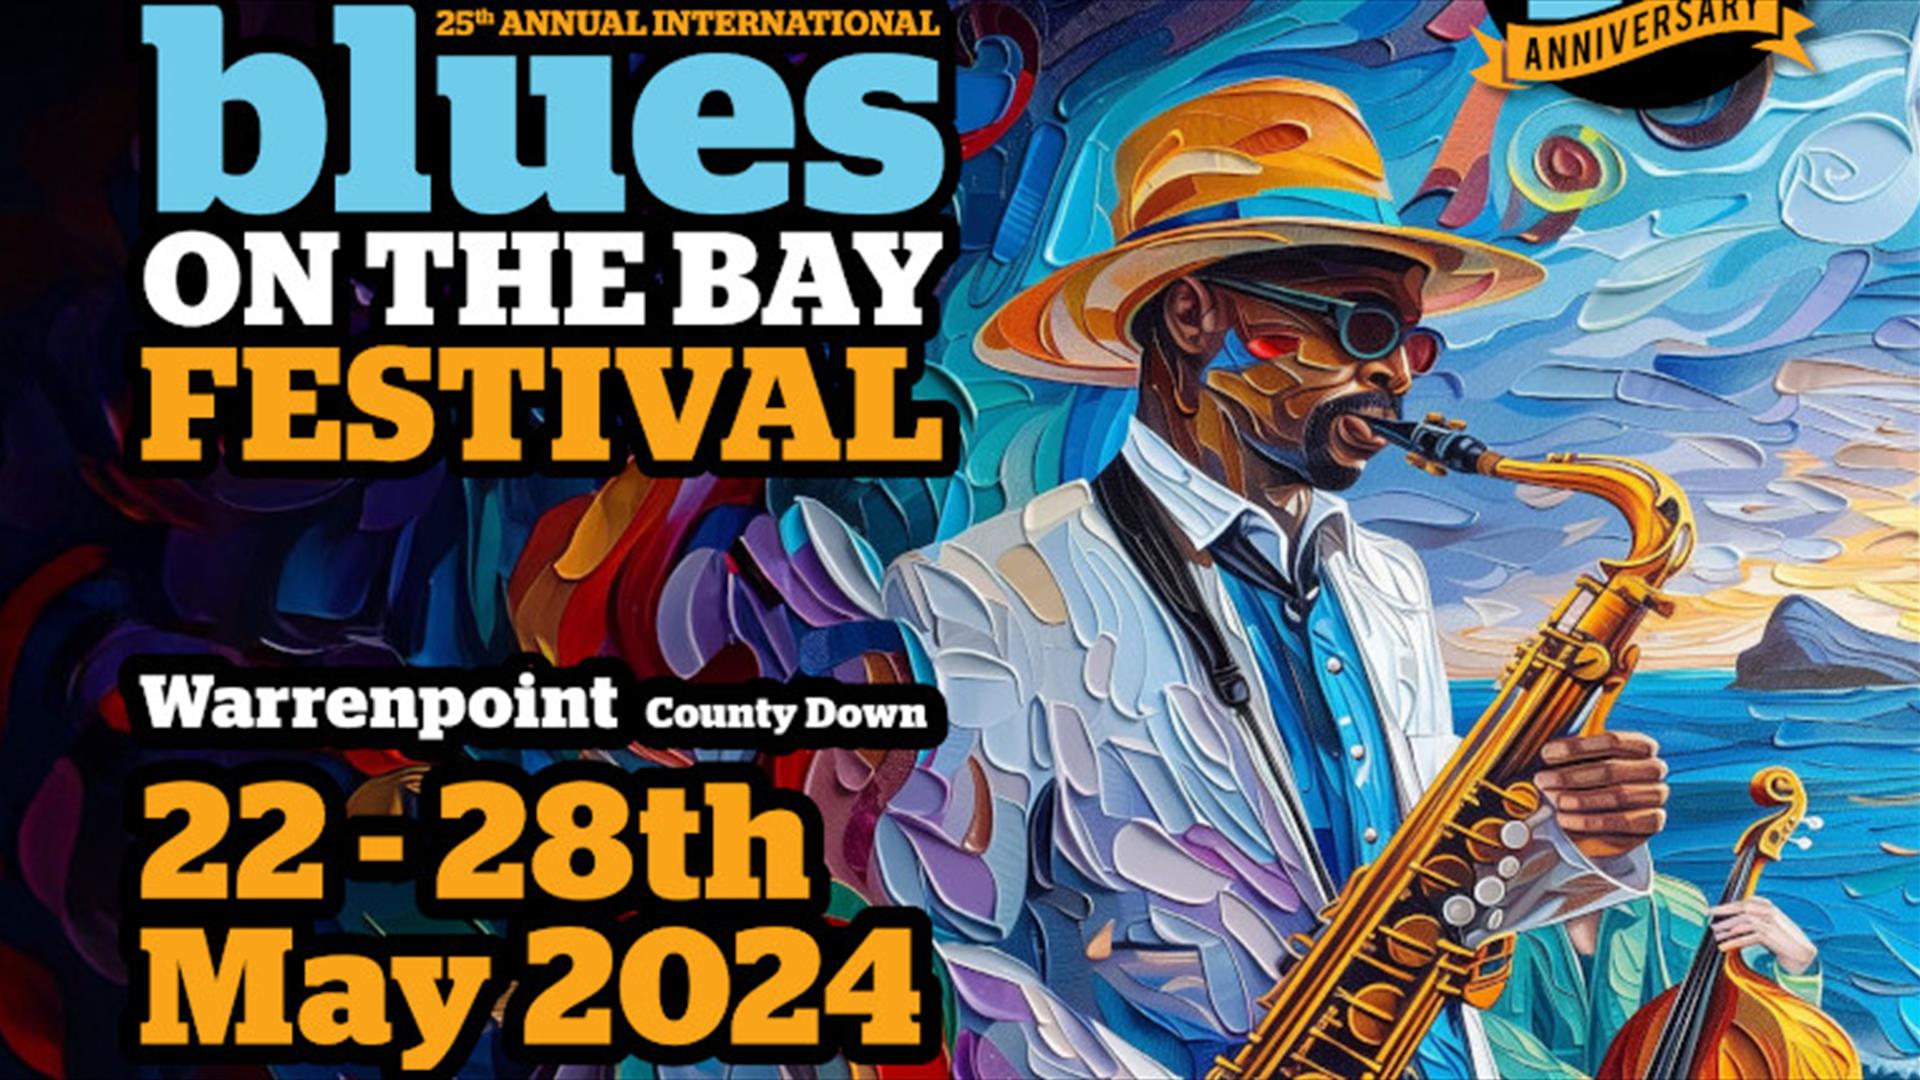 Blues on the Bay Festival Poster